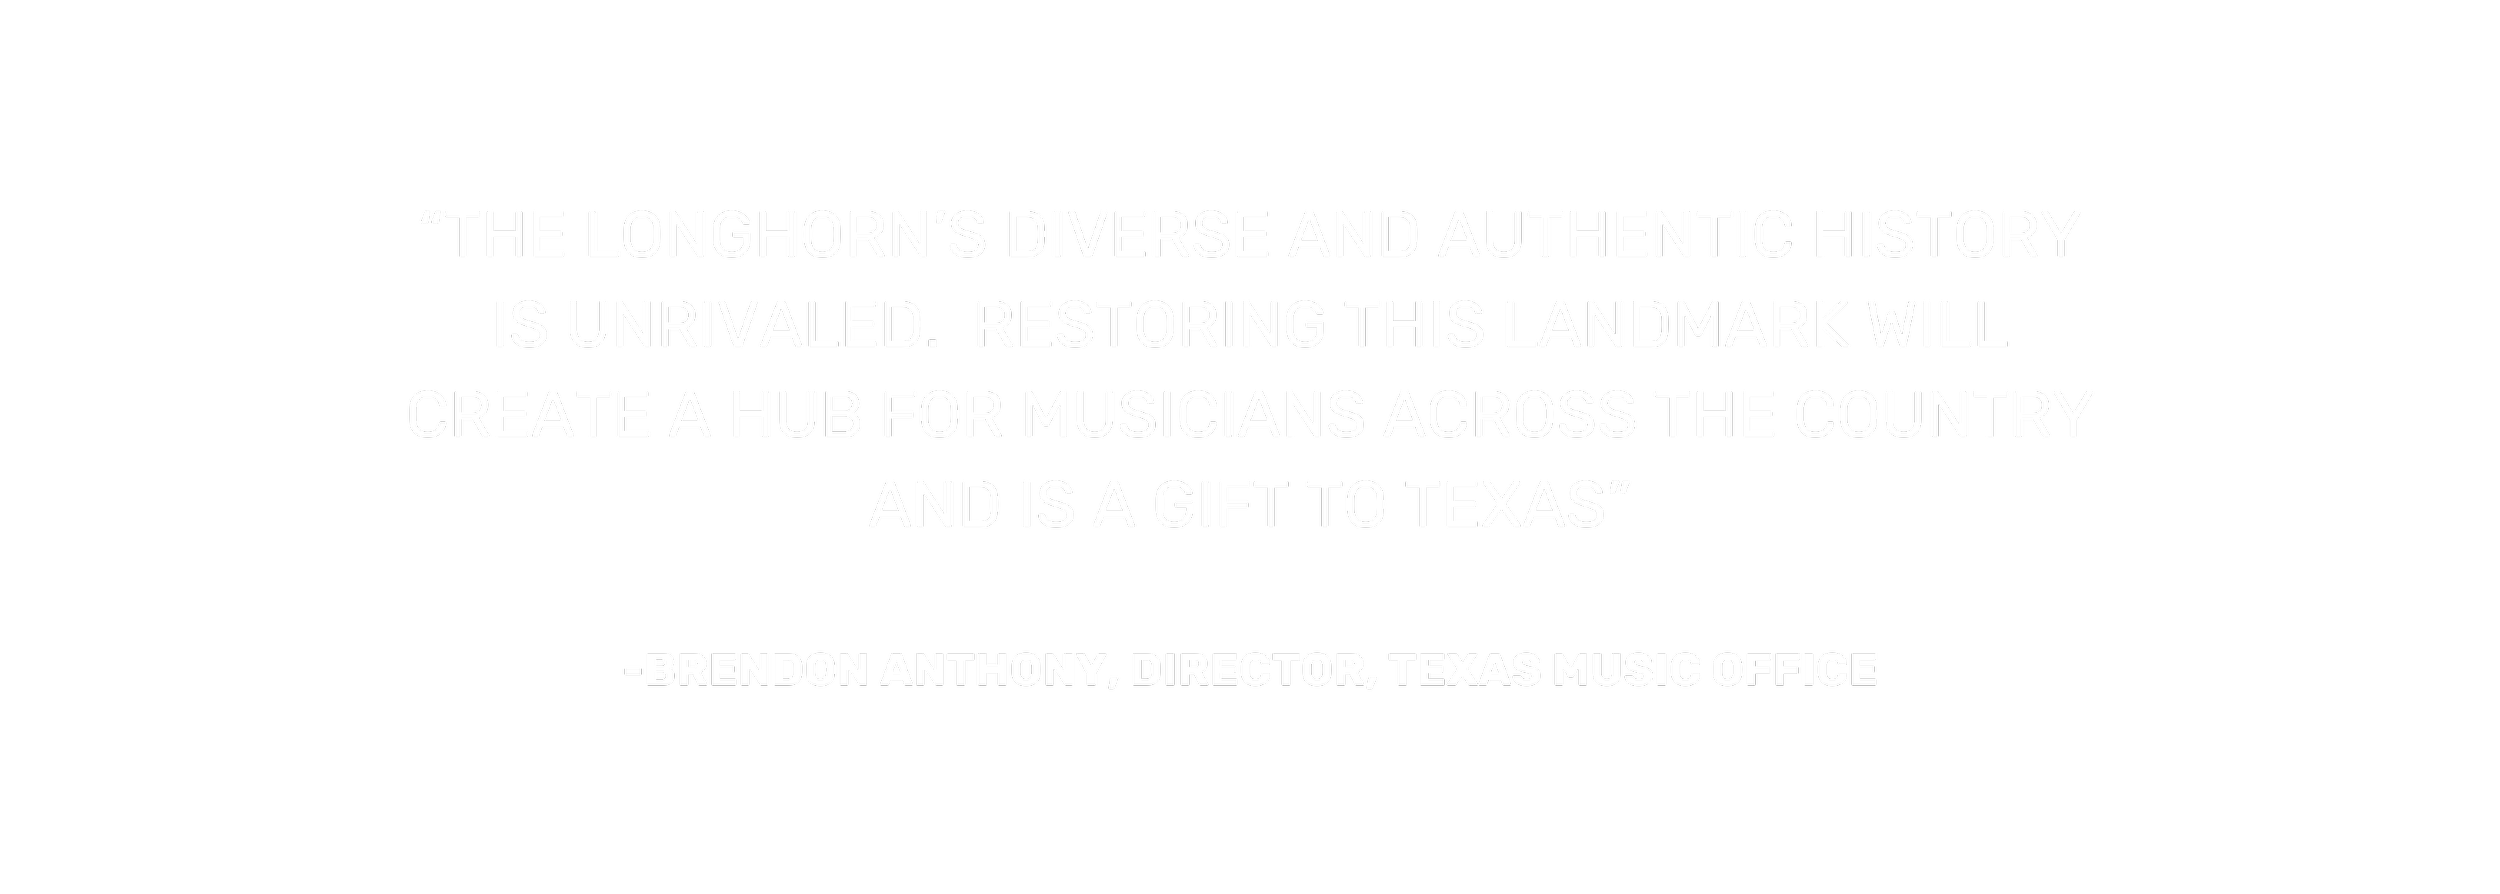 Brendon Anthony, Director, Texas Music Office